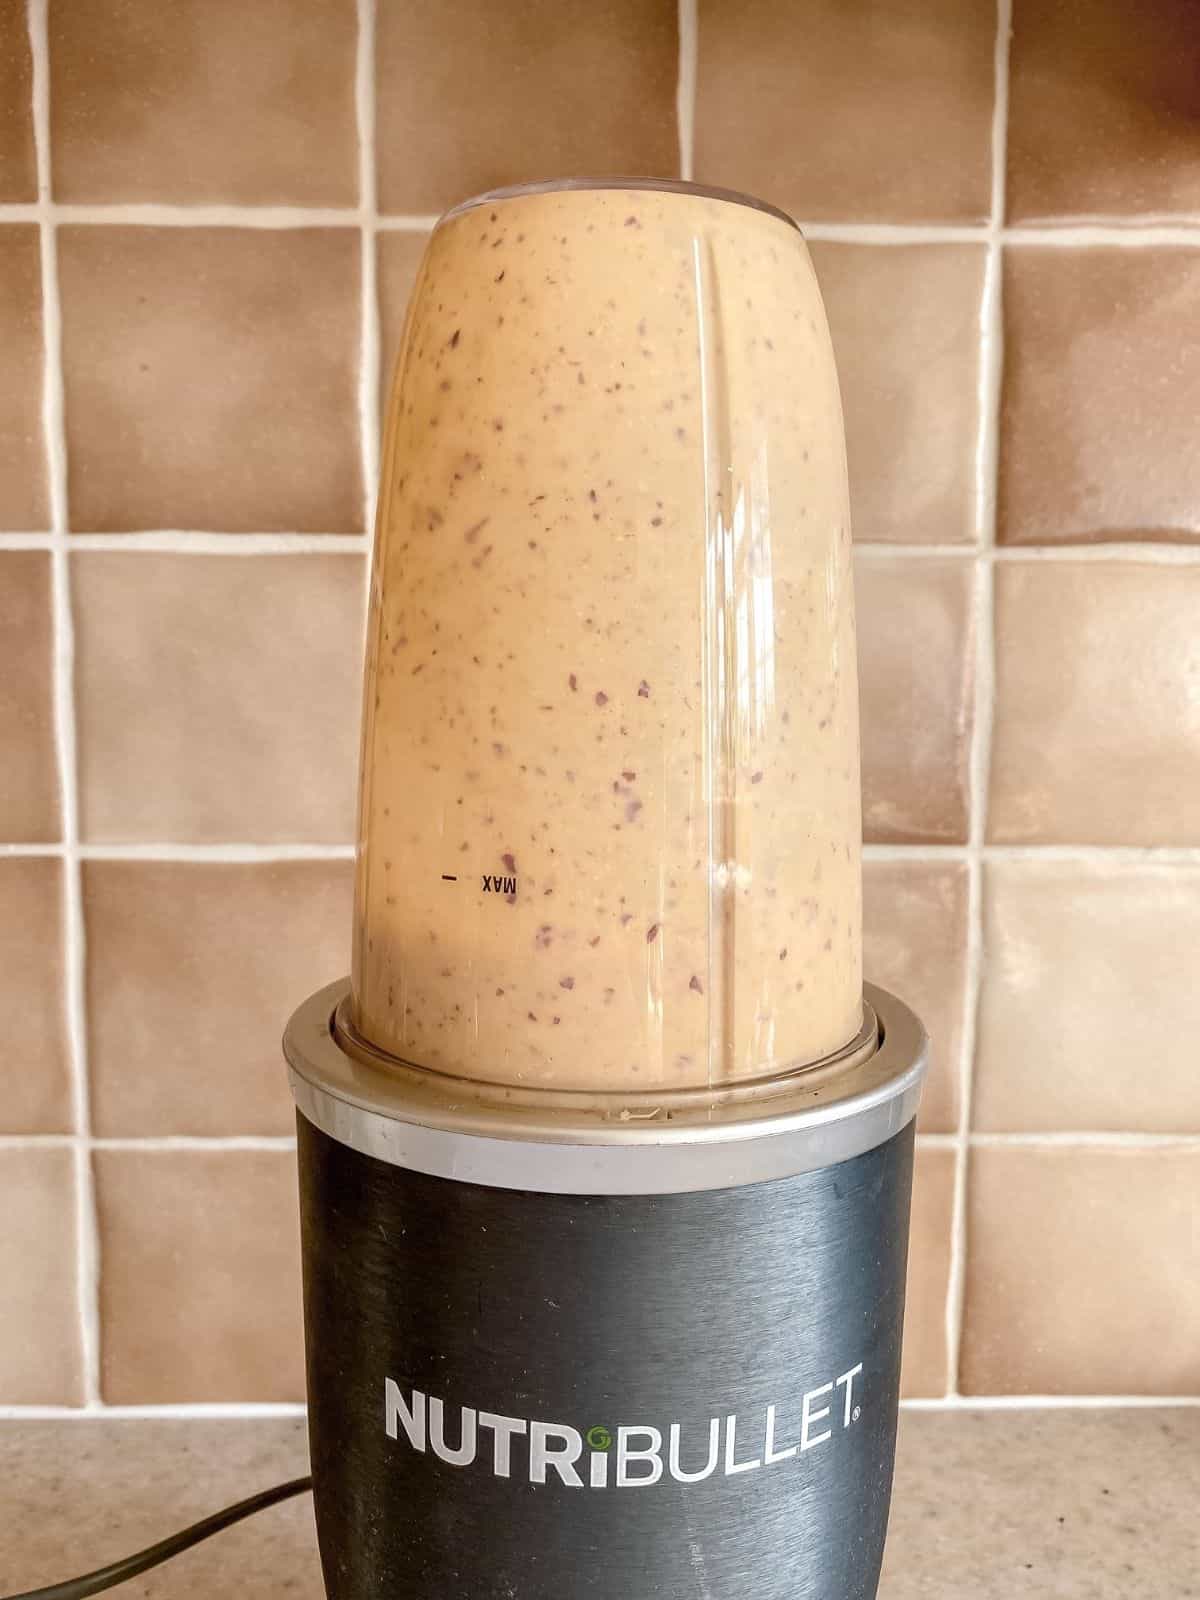 peach smoothie in a blender in front of a brown tiled wall.